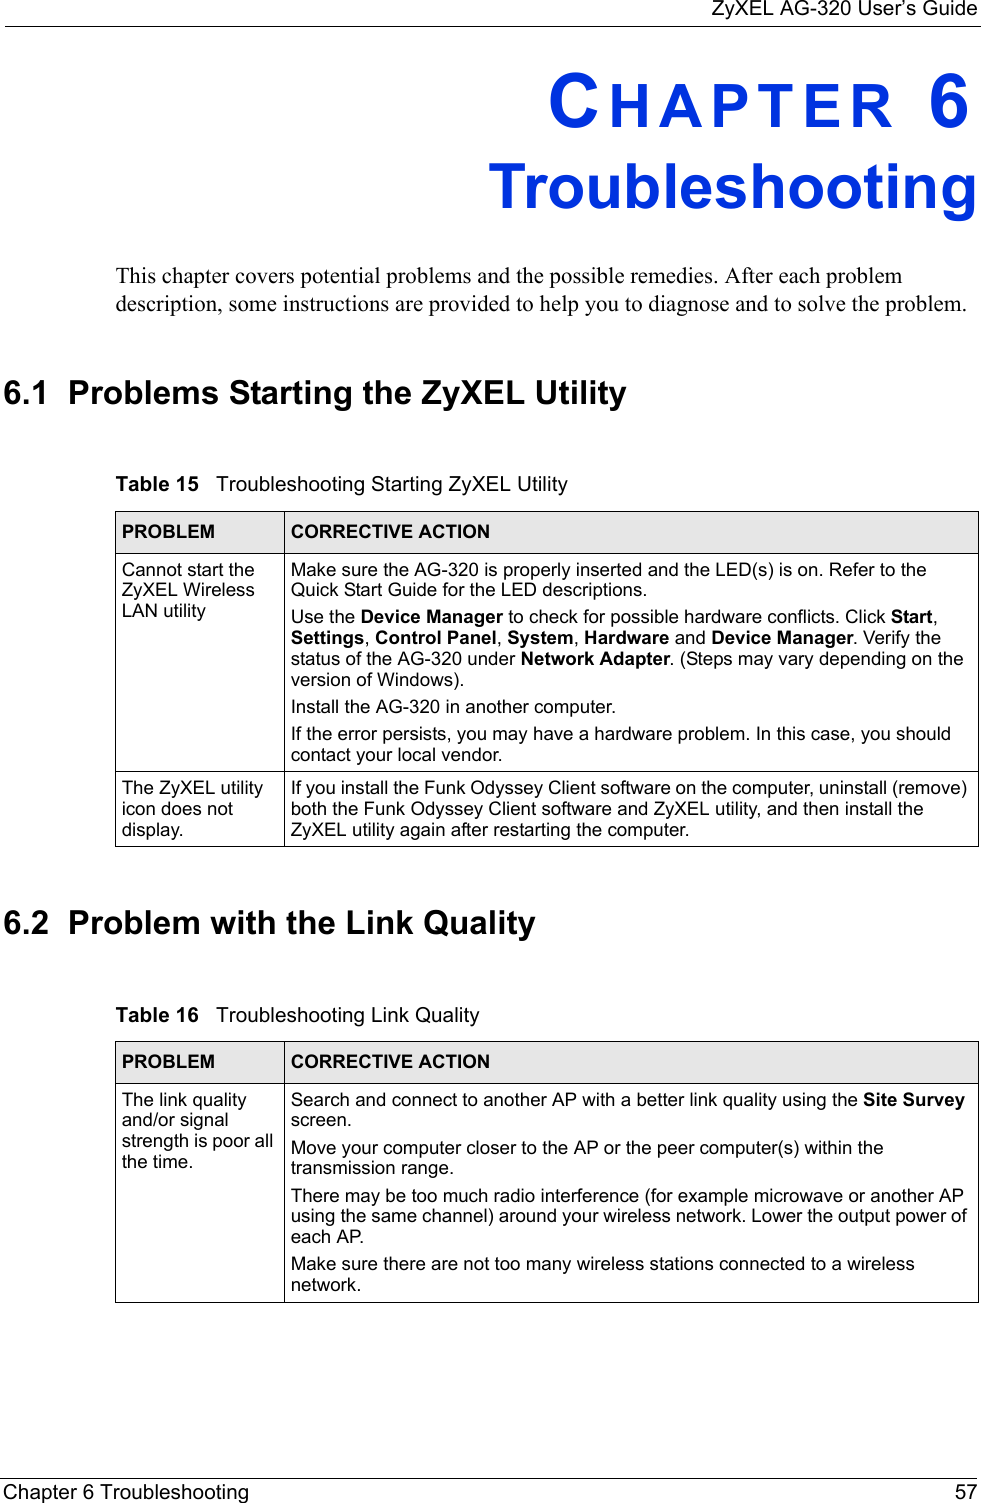 ZyXEL AG-320 User’s GuideChapter 6 Troubleshooting 57CHAPTER 6   TroubleshootingThis chapter covers potential problems and the possible remedies. After each problem description, some instructions are provided to help you to diagnose and to solve the problem.6.1  Problems Starting the ZyXEL Utility 6.2  Problem with the Link QualityTable 15   Troubleshooting Starting ZyXEL Utility  PROBLEM CORRECTIVE ACTIONCannot start the ZyXEL Wireless LAN utilityMake sure the AG-320 is properly inserted and the LED(s) is on. Refer to the Quick Start Guide for the LED descriptions.Use the Device Manager to check for possible hardware conflicts. Click Start, Settings, Control Panel, System, Hardware and Device Manager. Verify the status of the AG-320 under Network Adapter. (Steps may vary depending on the version of Windows). Install the AG-320 in another computer.If the error persists, you may have a hardware problem. In this case, you should contact your local vendor.The ZyXEL utility icon does not display.If you install the Funk Odyssey Client software on the computer, uninstall (remove) both the Funk Odyssey Client software and ZyXEL utility, and then install the ZyXEL utility again after restarting the computer.Table 16   Troubleshooting Link Quality PROBLEM CORRECTIVE ACTIONThe link quality and/or signal strength is poor all the time.Search and connect to another AP with a better link quality using the Site Survey screen.Move your computer closer to the AP or the peer computer(s) within the transmission range.There may be too much radio interference (for example microwave or another AP using the same channel) around your wireless network. Lower the output power of each AP.Make sure there are not too many wireless stations connected to a wireless network.